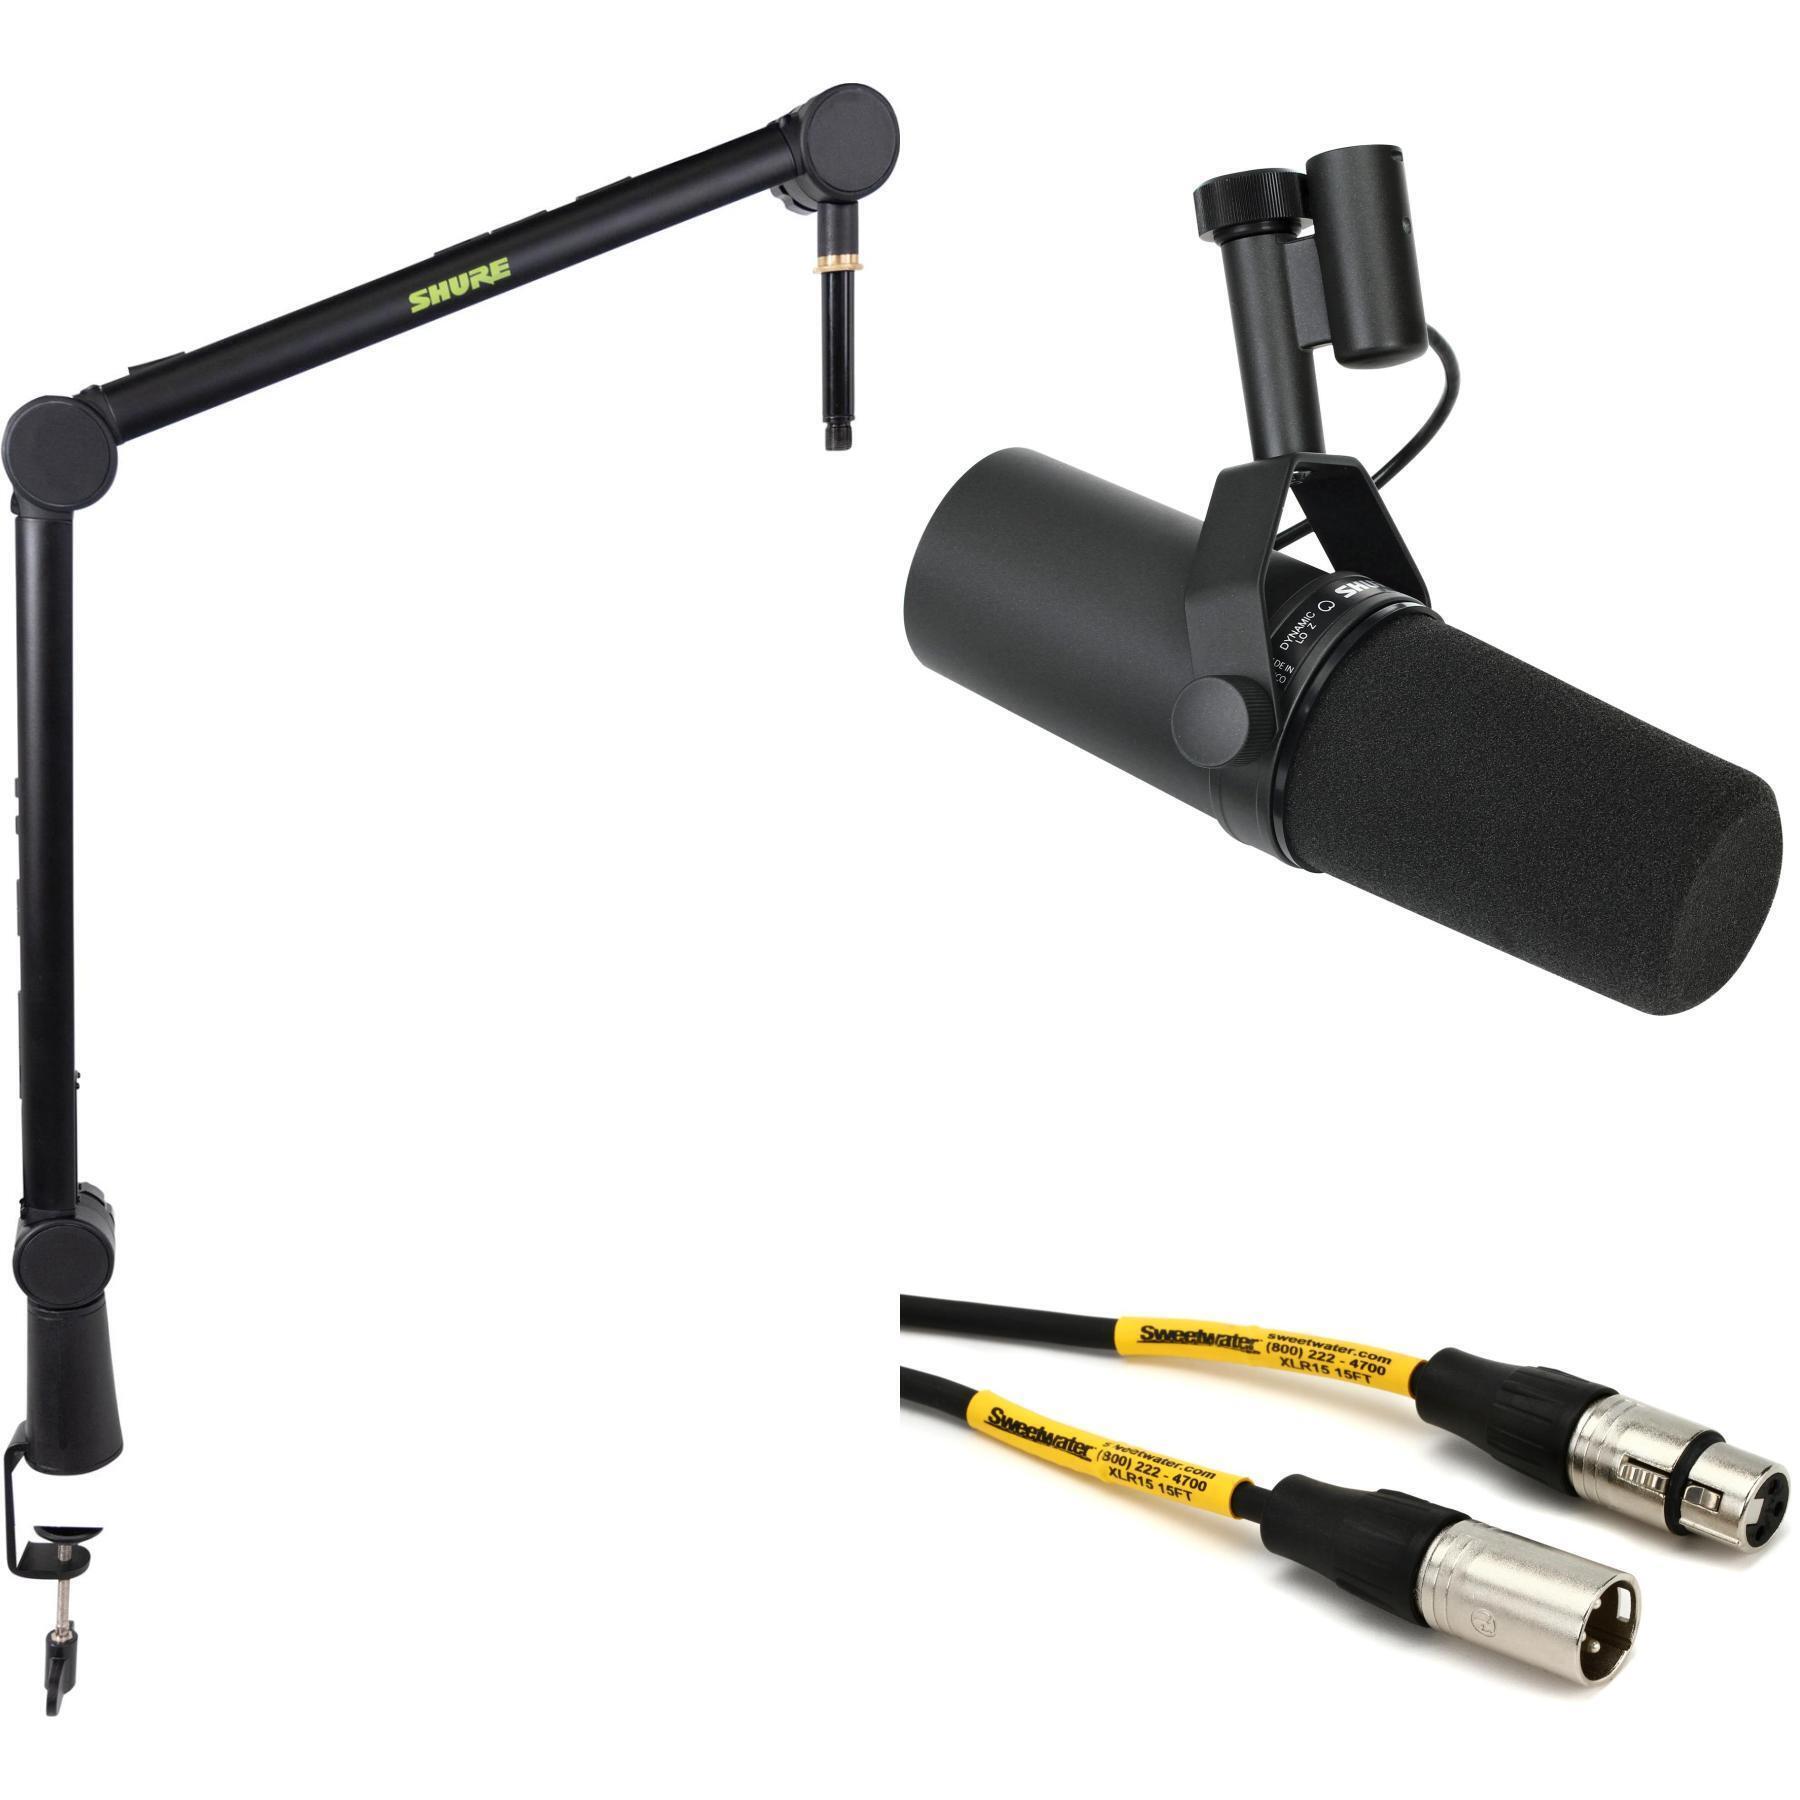 Shure SM7B Review (Is It Worth The Hefty Price Tag?)